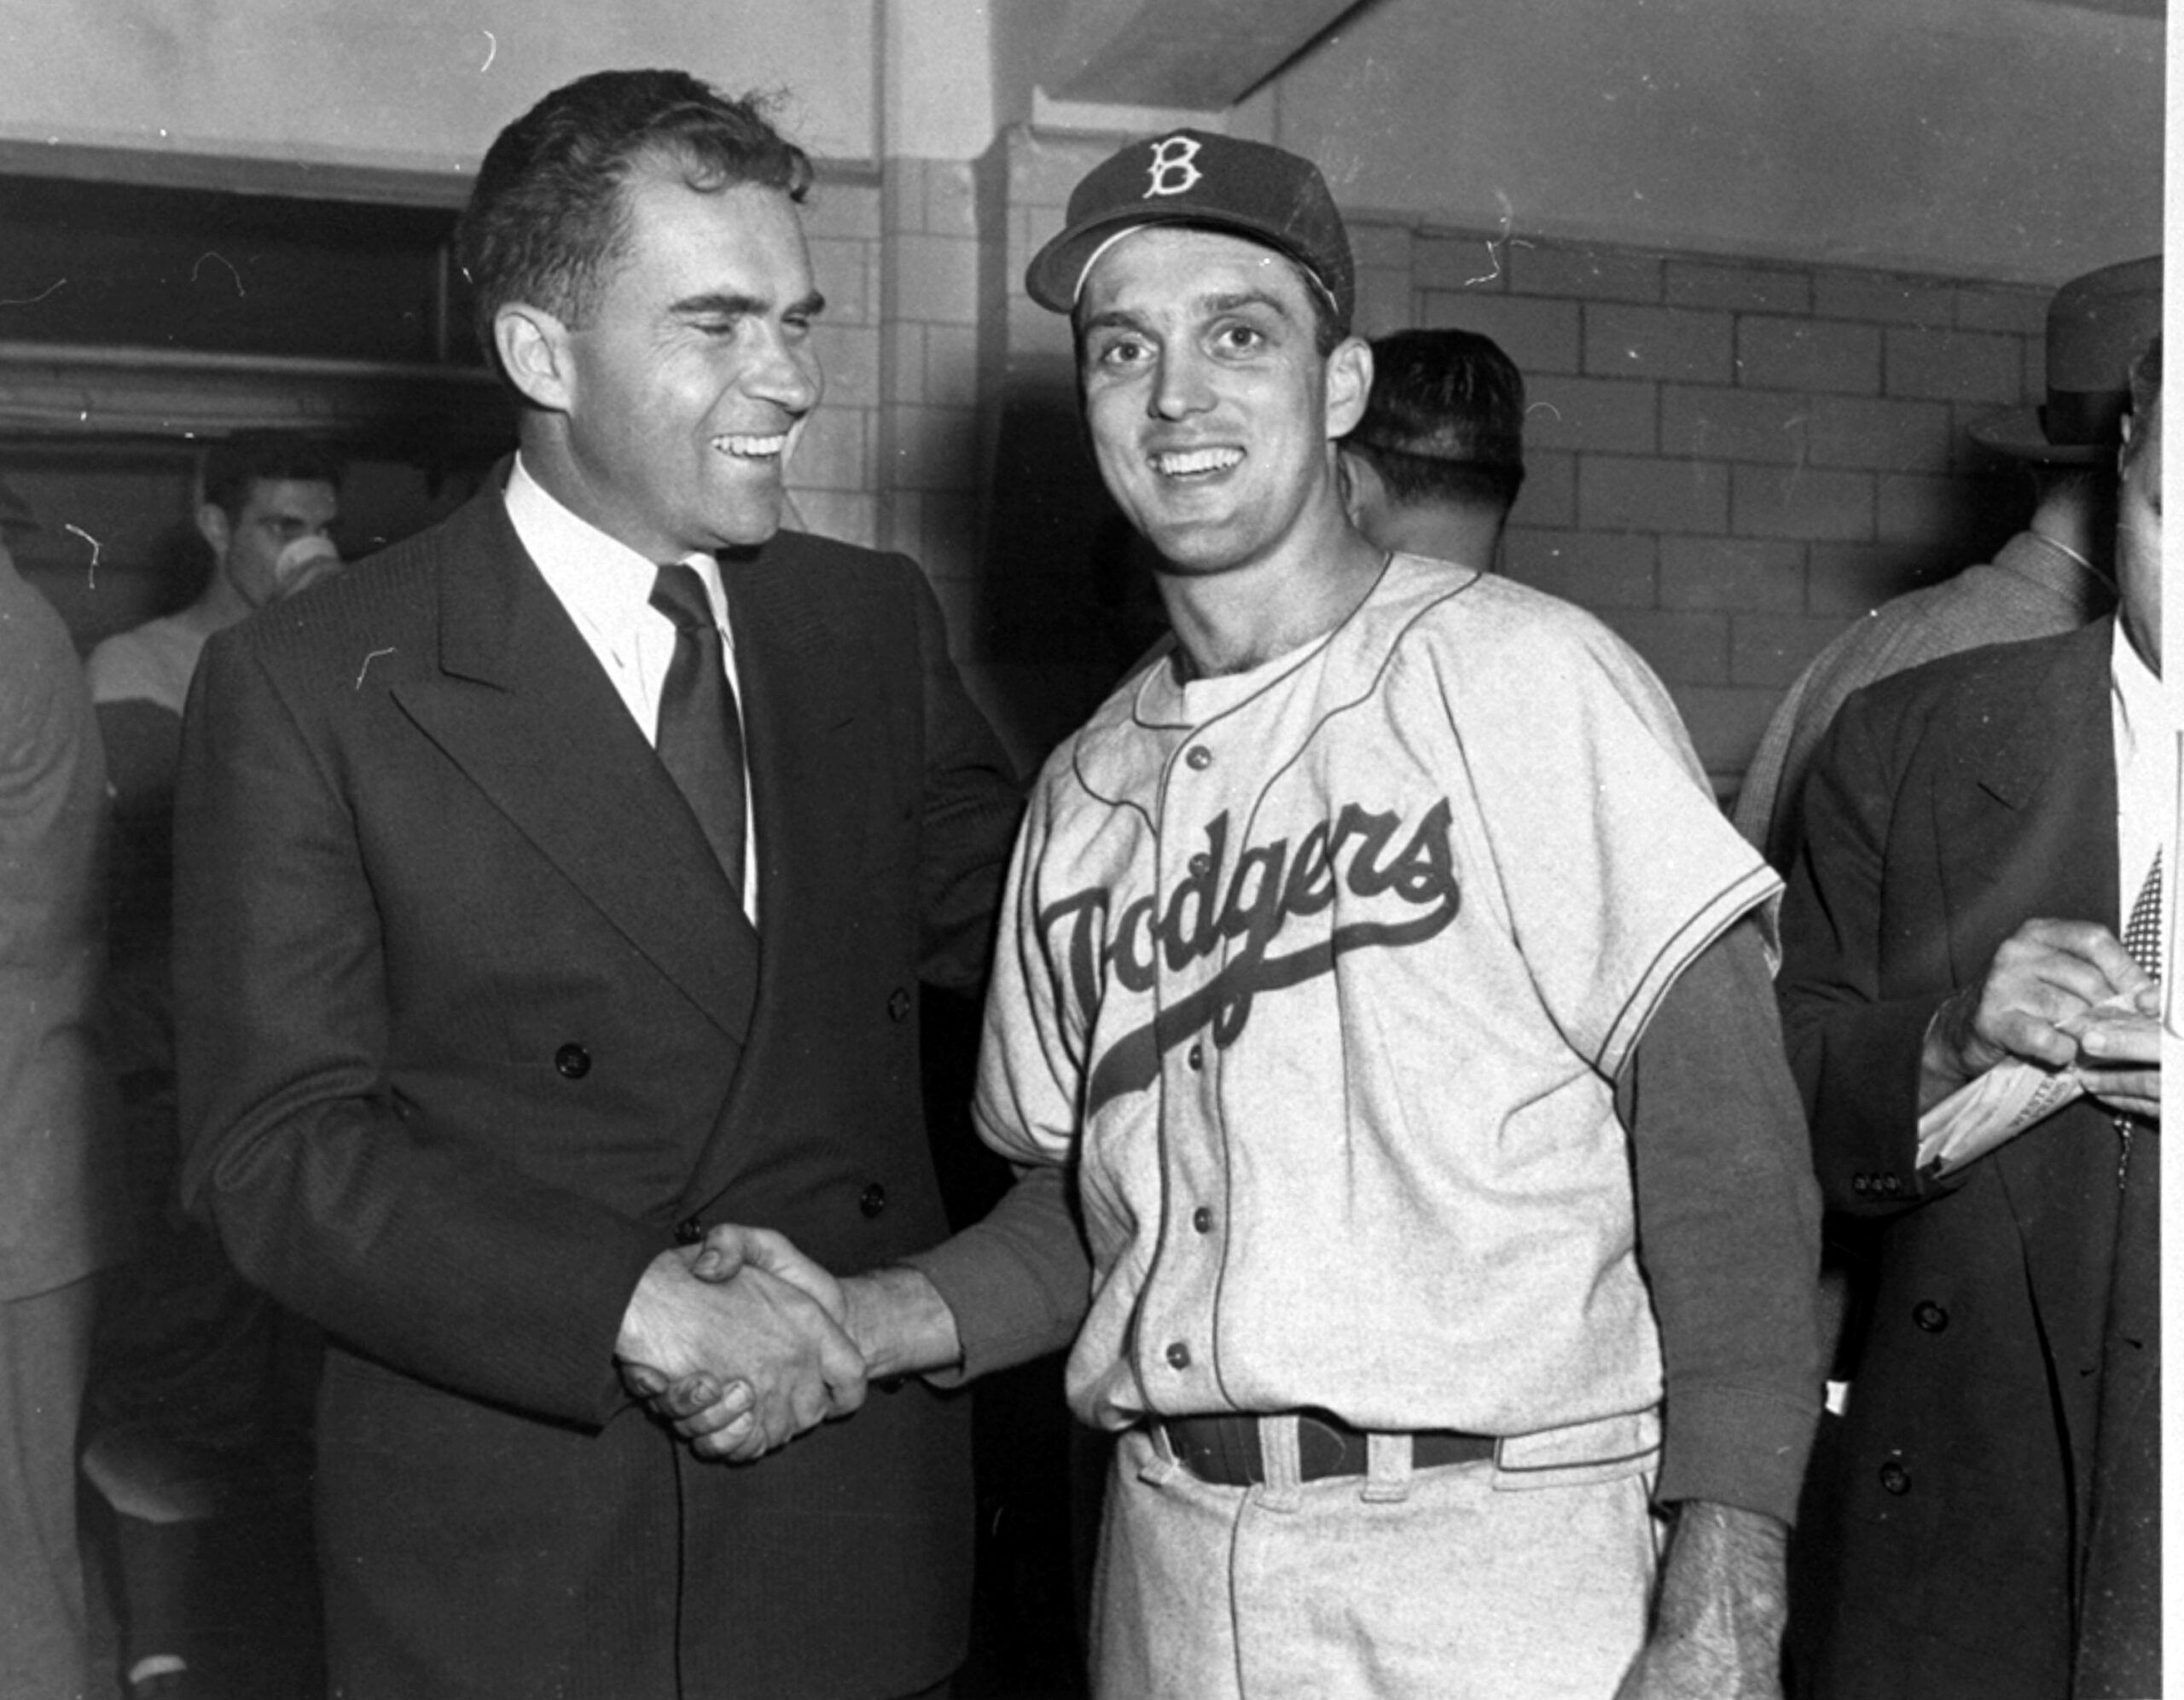 Sen. Richard Nixon, GOP Vice Presidential candidate, has a smile and a handshake for Brooklyn Dodgers hurler Carl Erskine after his eleven-inning, 6-5 win over the Yankees in the fifth World Series game at Yankee Stadium in New York City, October 5, 1952.